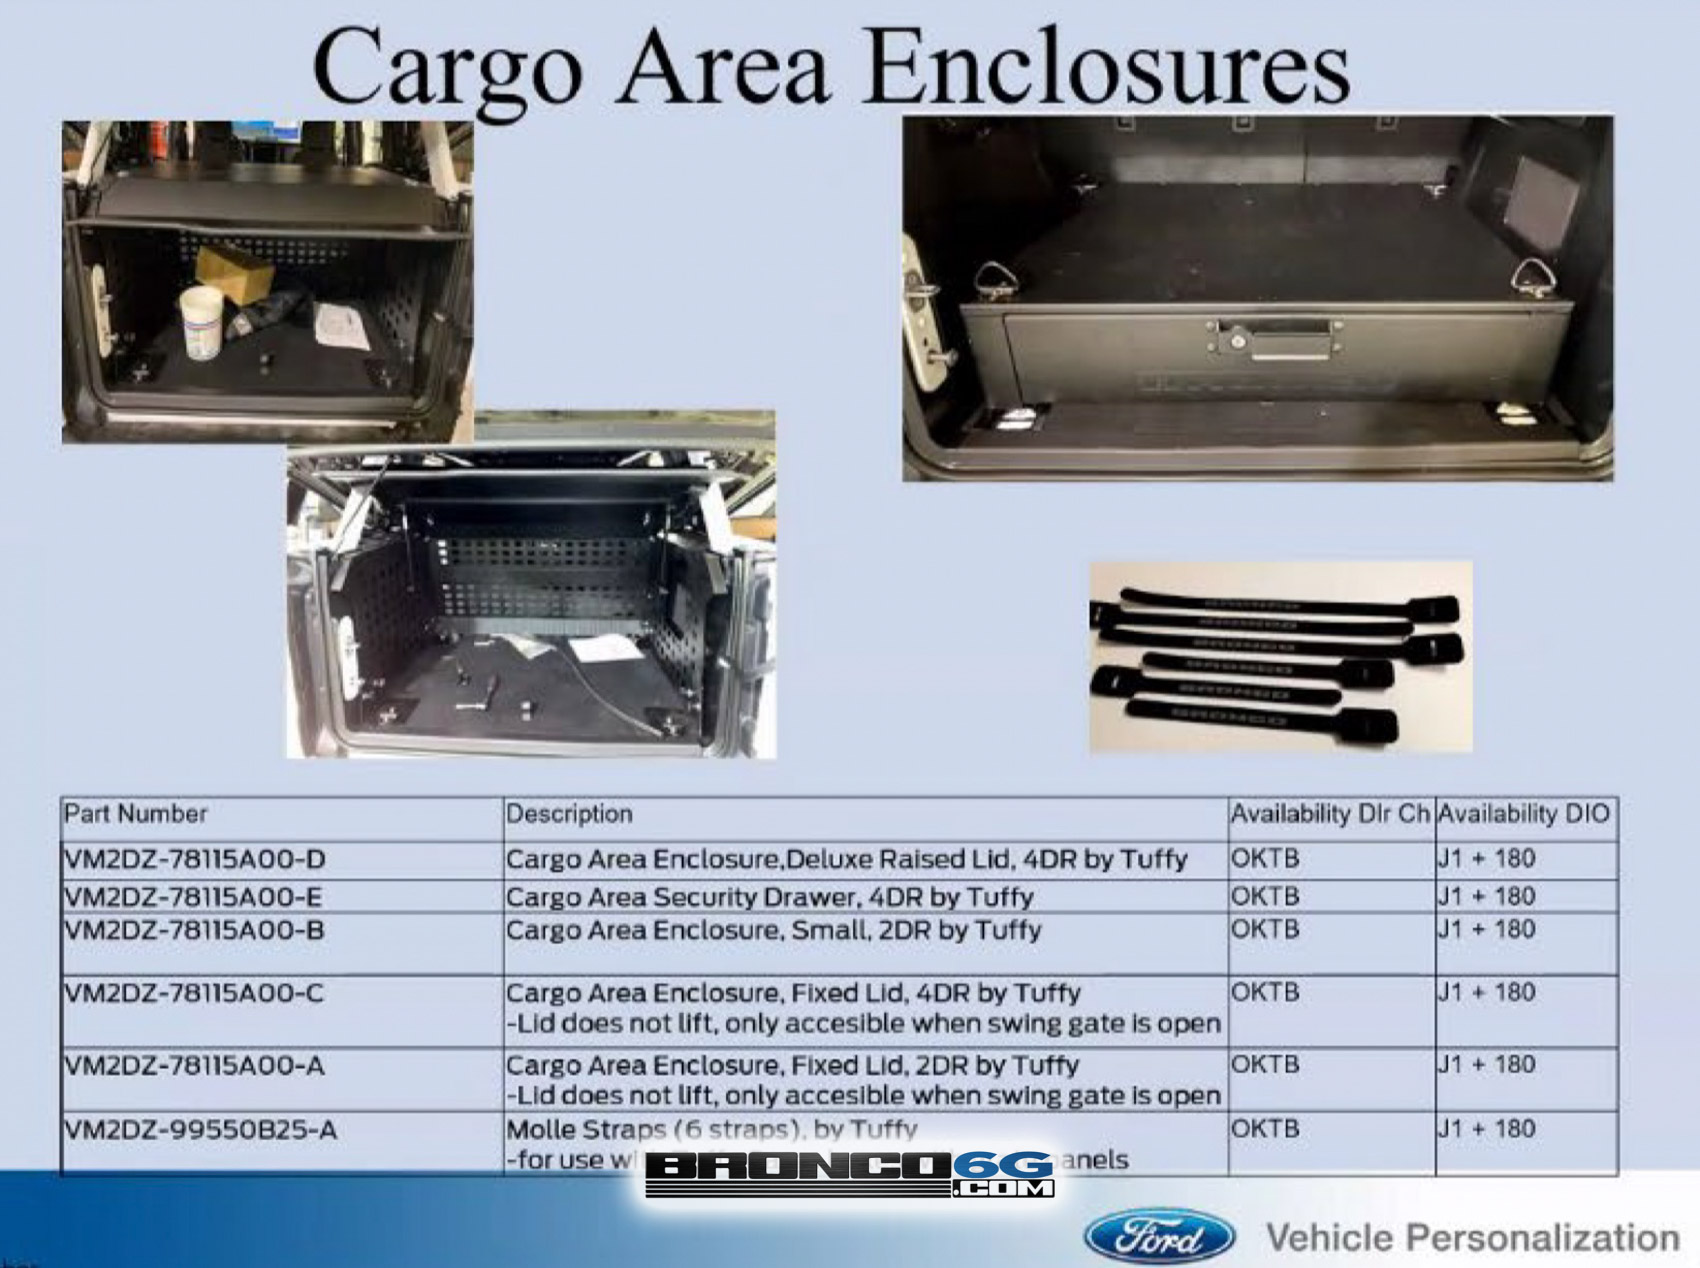 2021 Bronco Cargo Area Enclosure -  Ford Performance OEM factory accessory.jpg